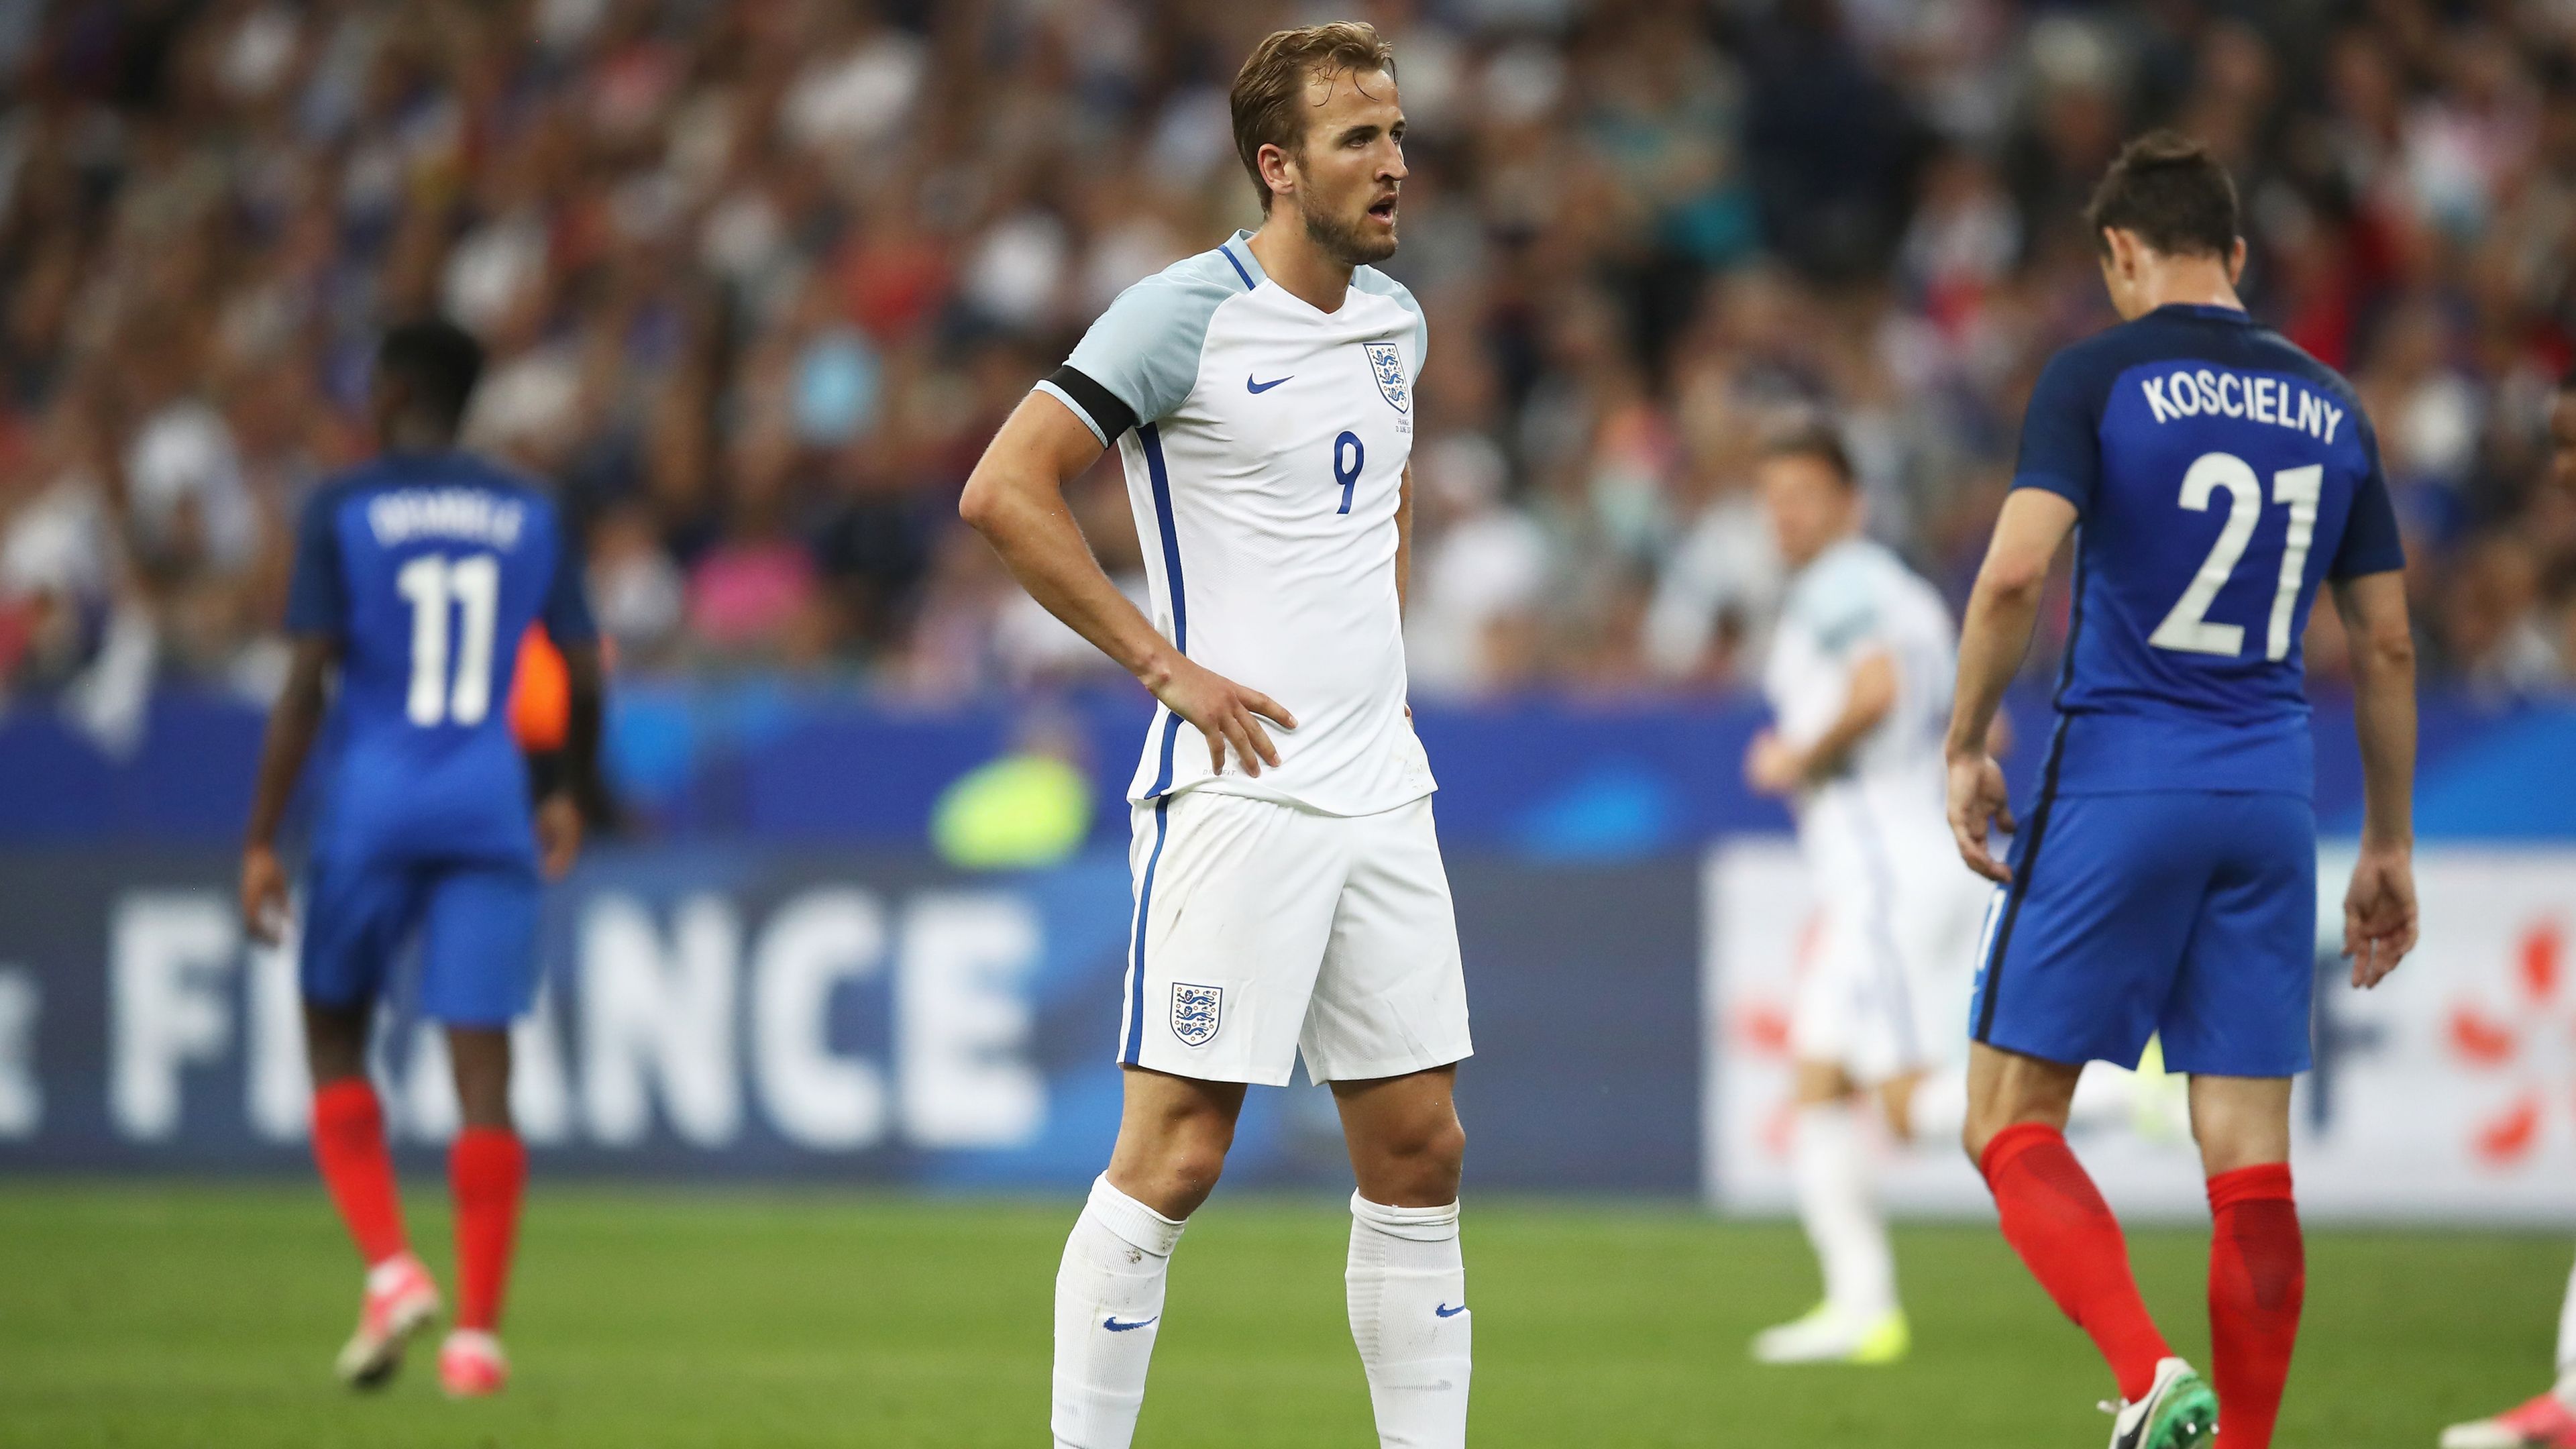 Harry Kane of England during a match against France in 2017.